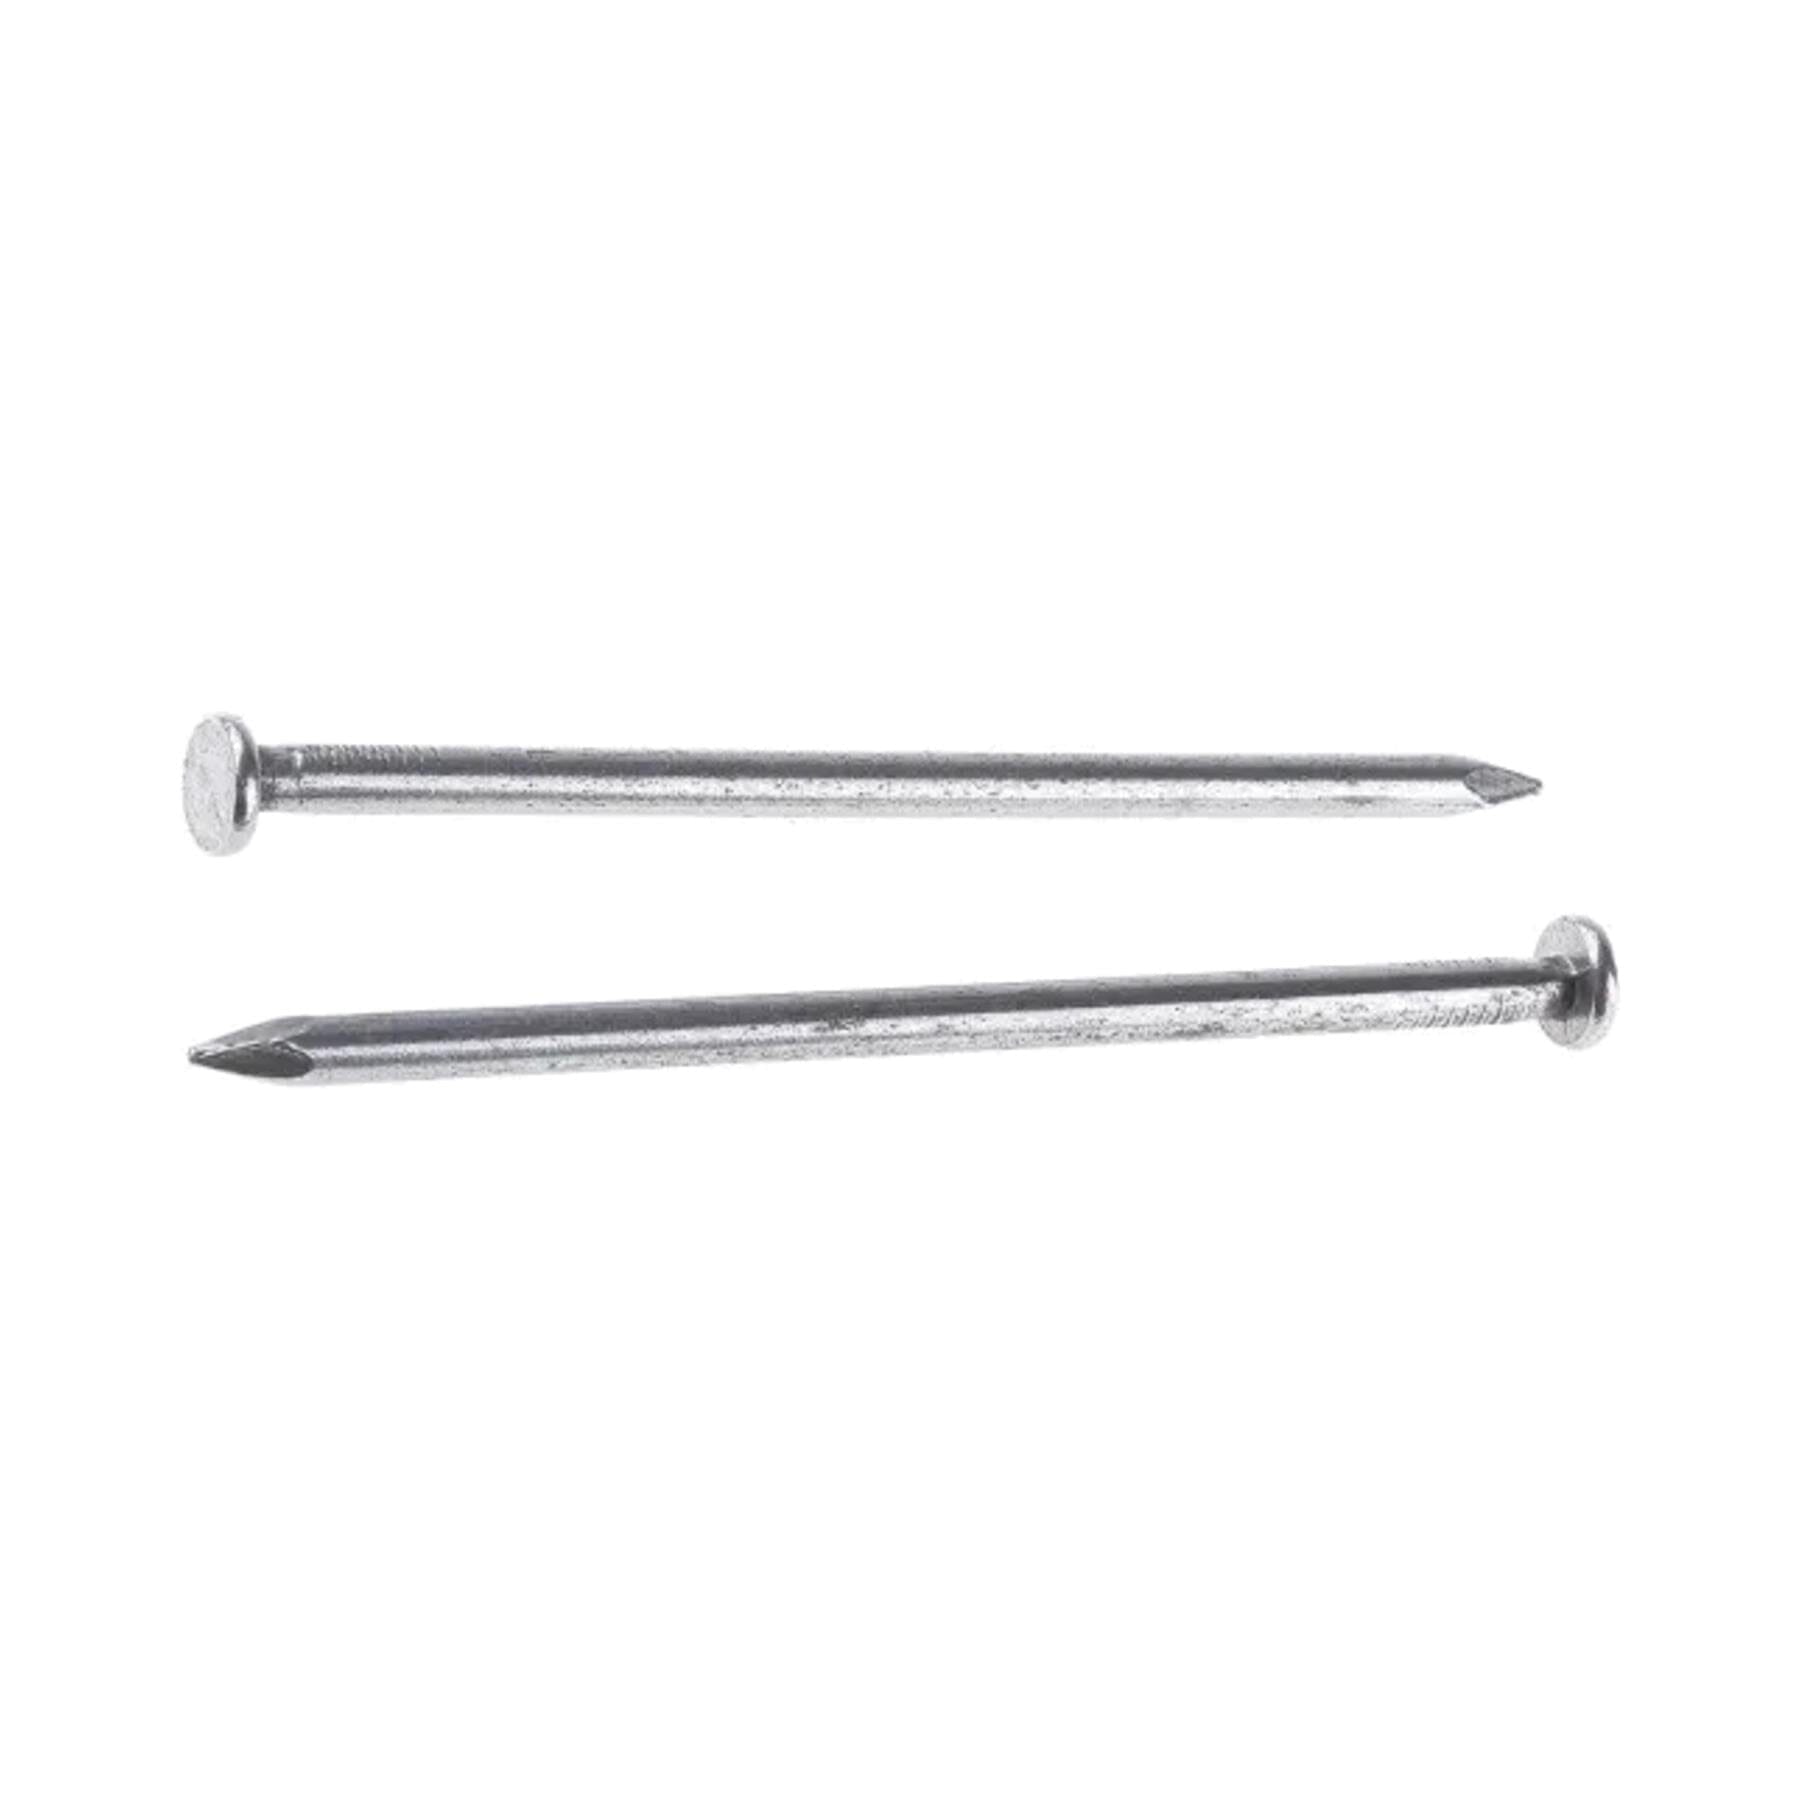 Home Hardware 38mm Round Wire Nails 250g Round Nails | Snape & Sons